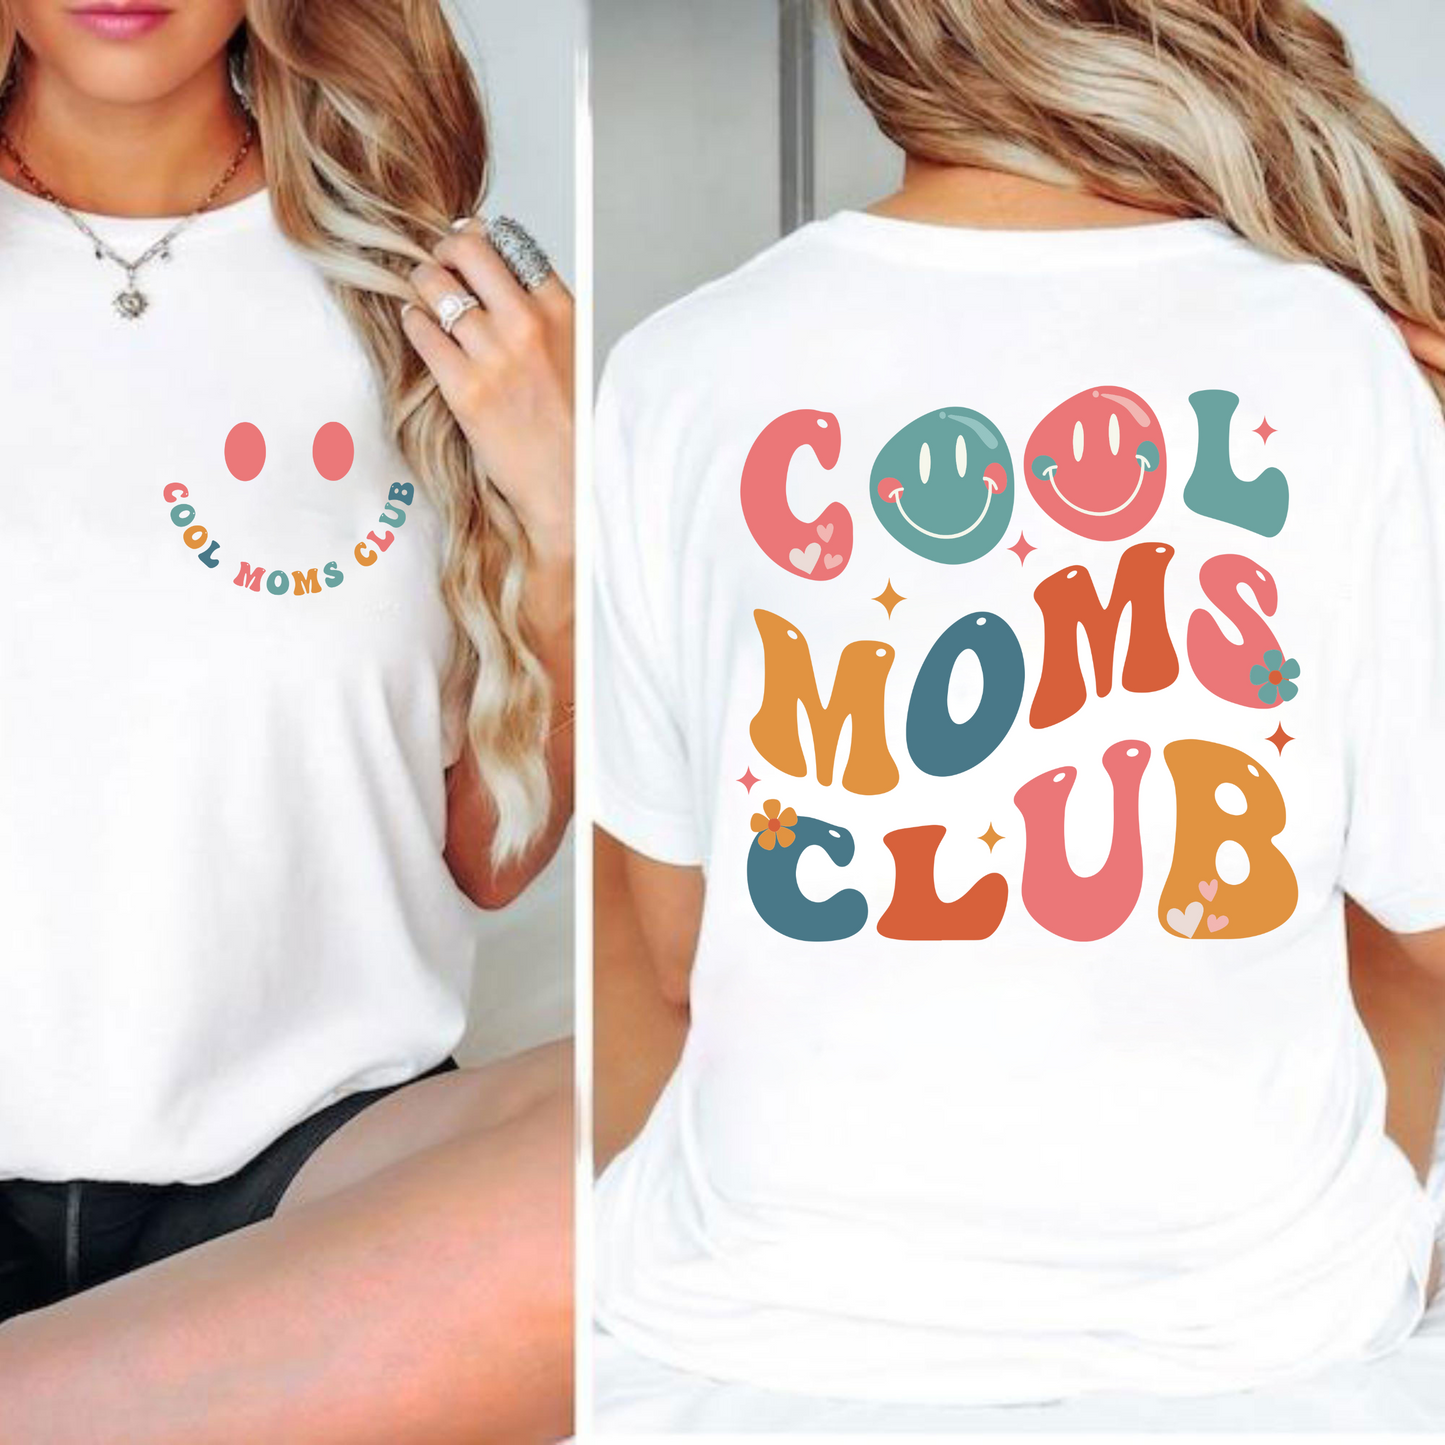 Cool Mom Club – Funny Gift for the Best Mom, Perfect for Mother's Day